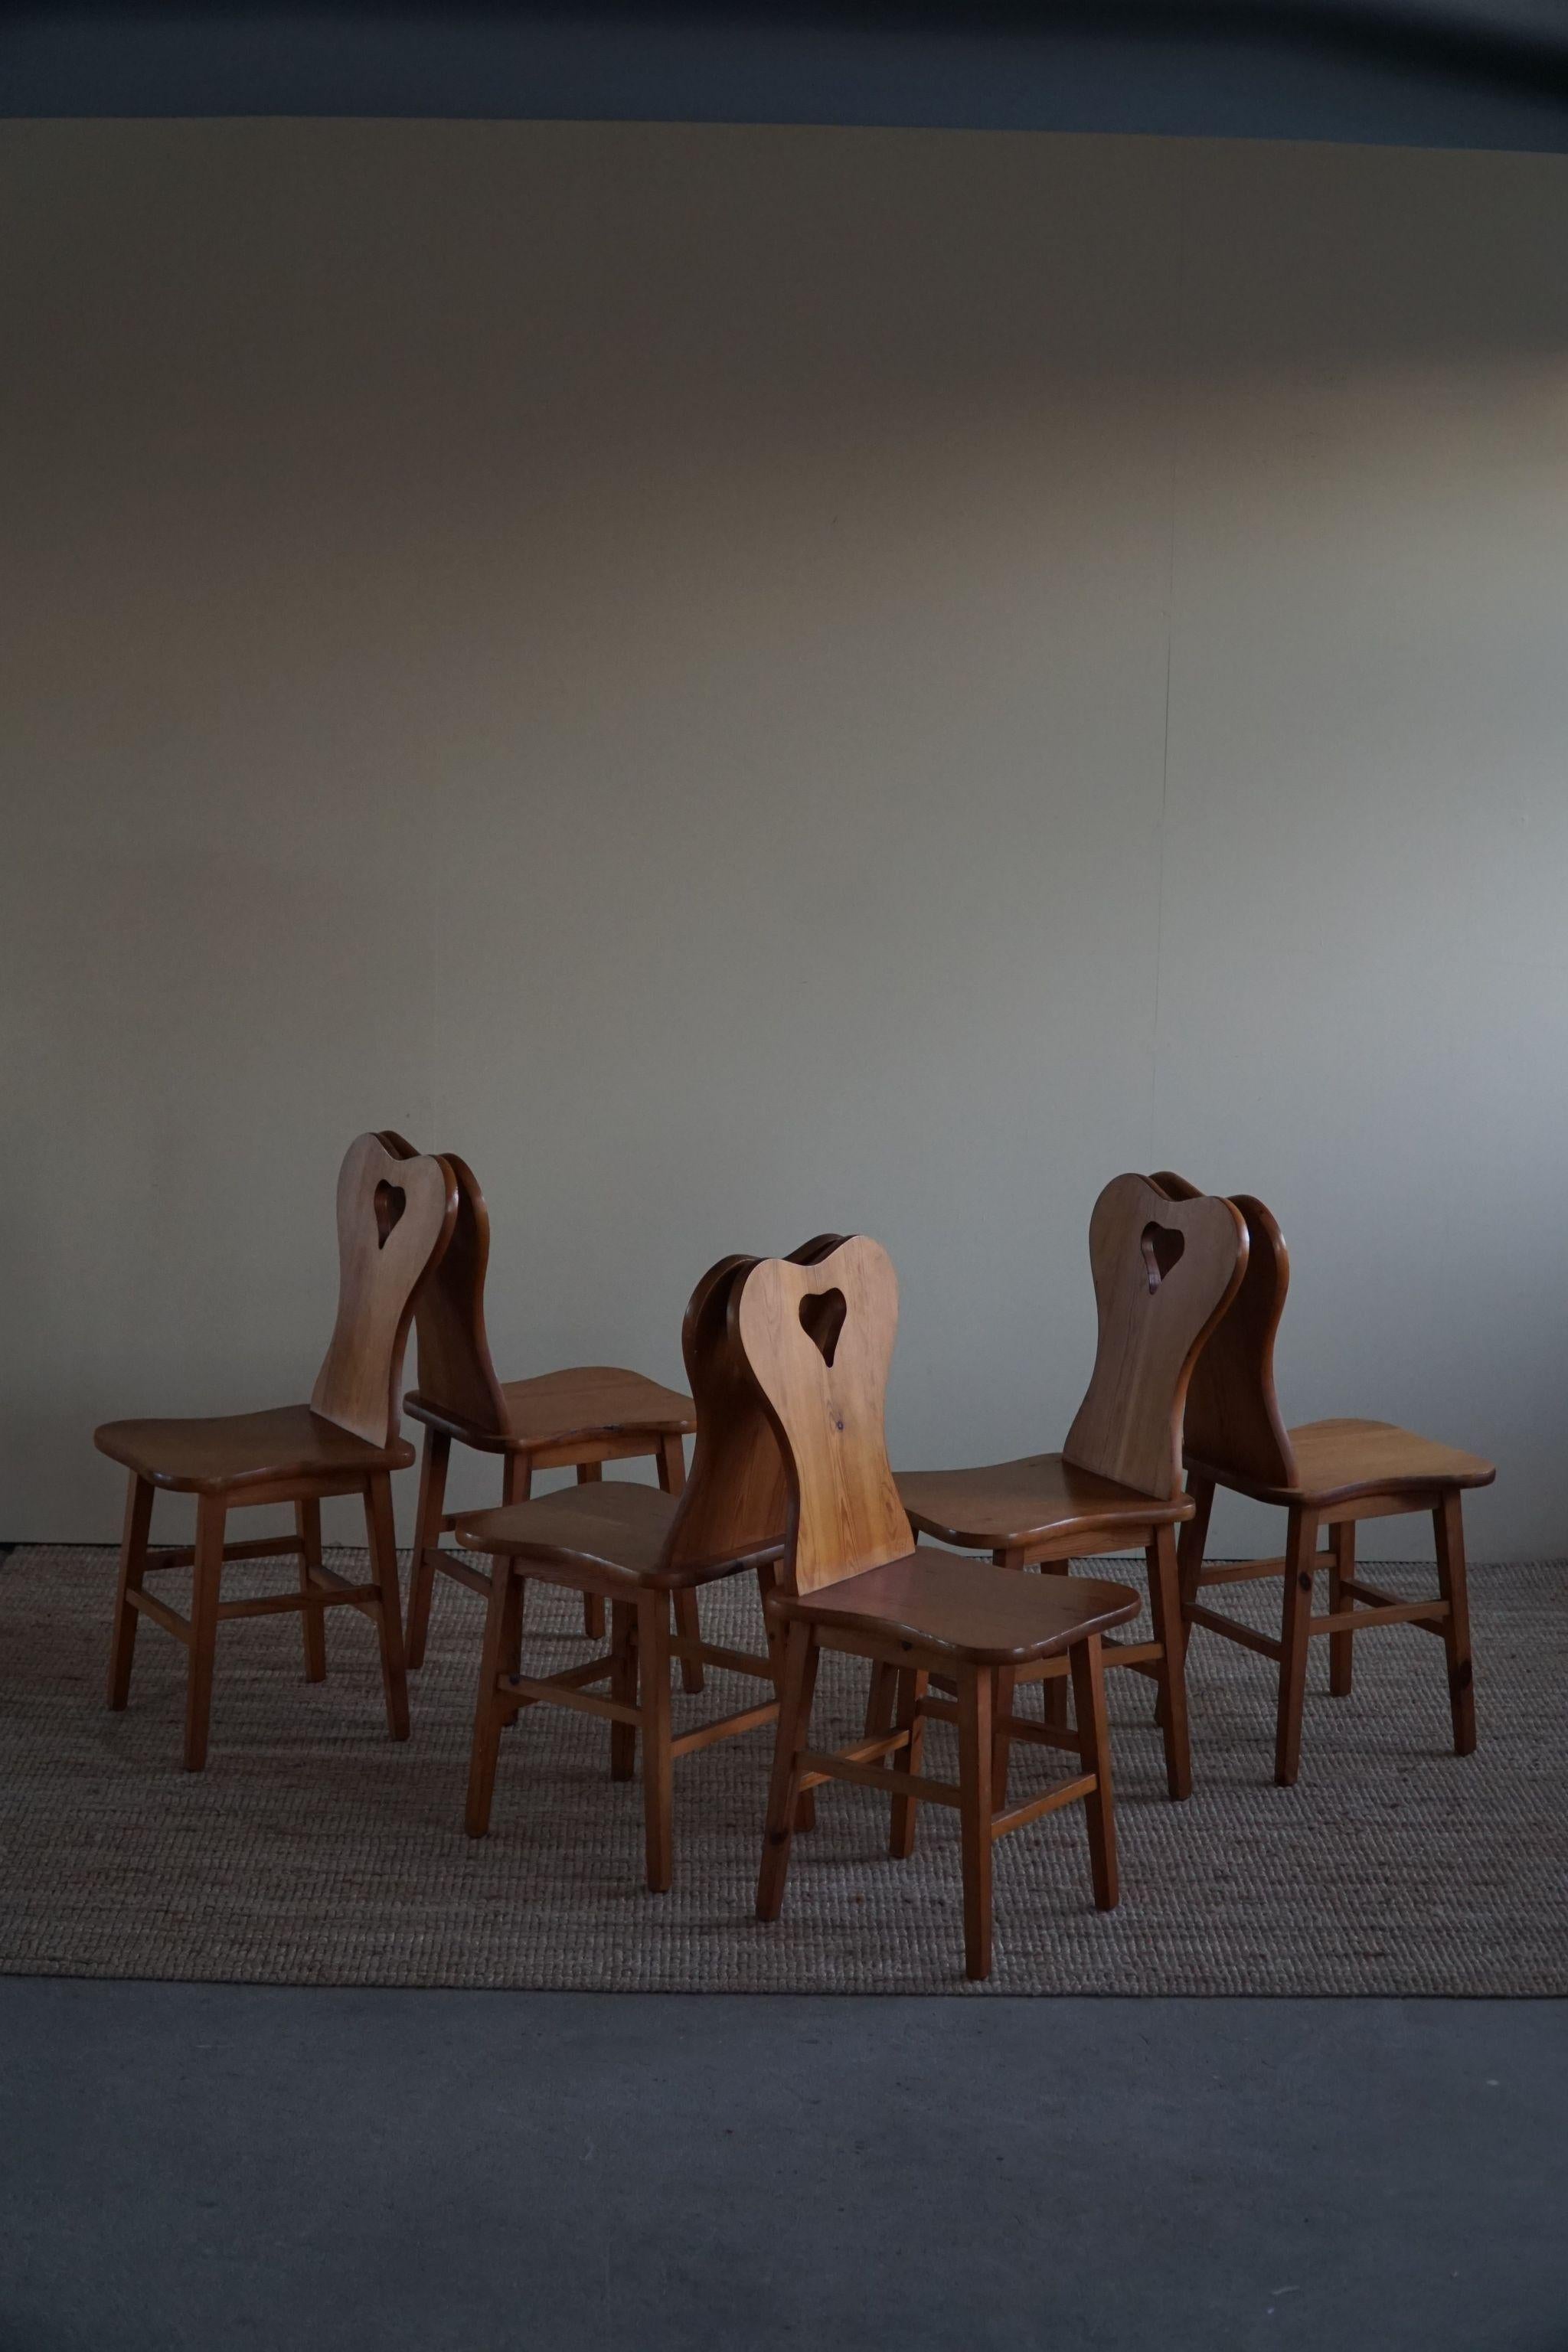 Set of 6 solid pine dining chairs, made by unknown Danish Cabinetmaker in 1950s.

A decorative set in a good vintage condition. Perfect for the modern interior. A warm colour and patina that pair well with the minimalist scandinavian lifestyle.